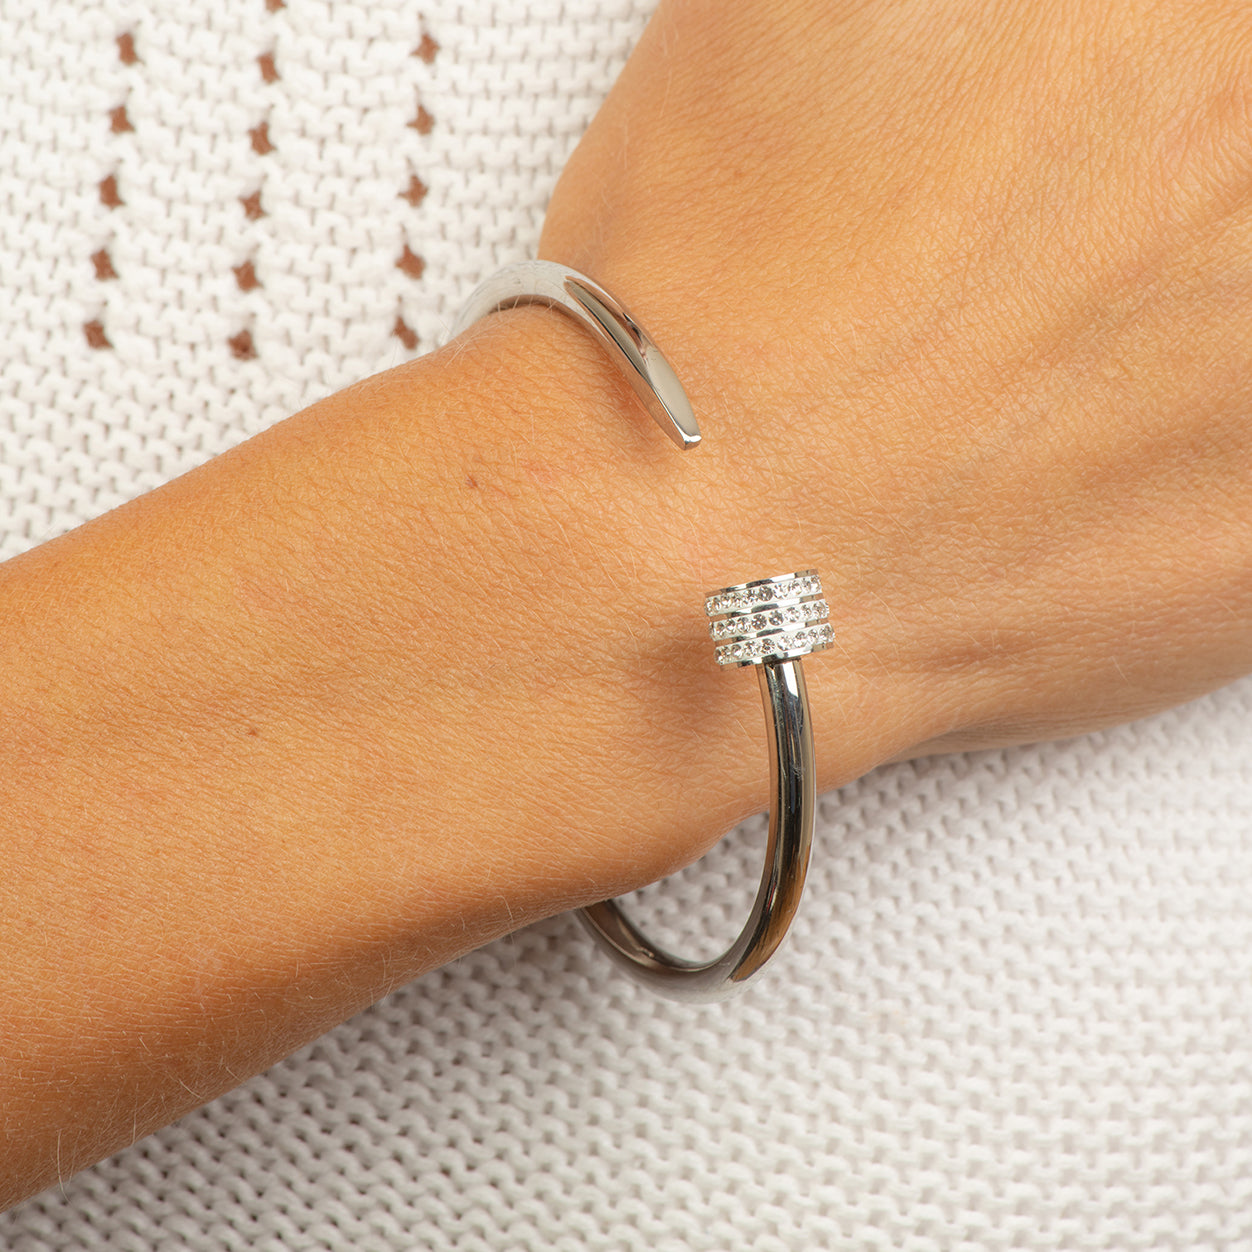 Stainless steel bangle half a nail with crystals